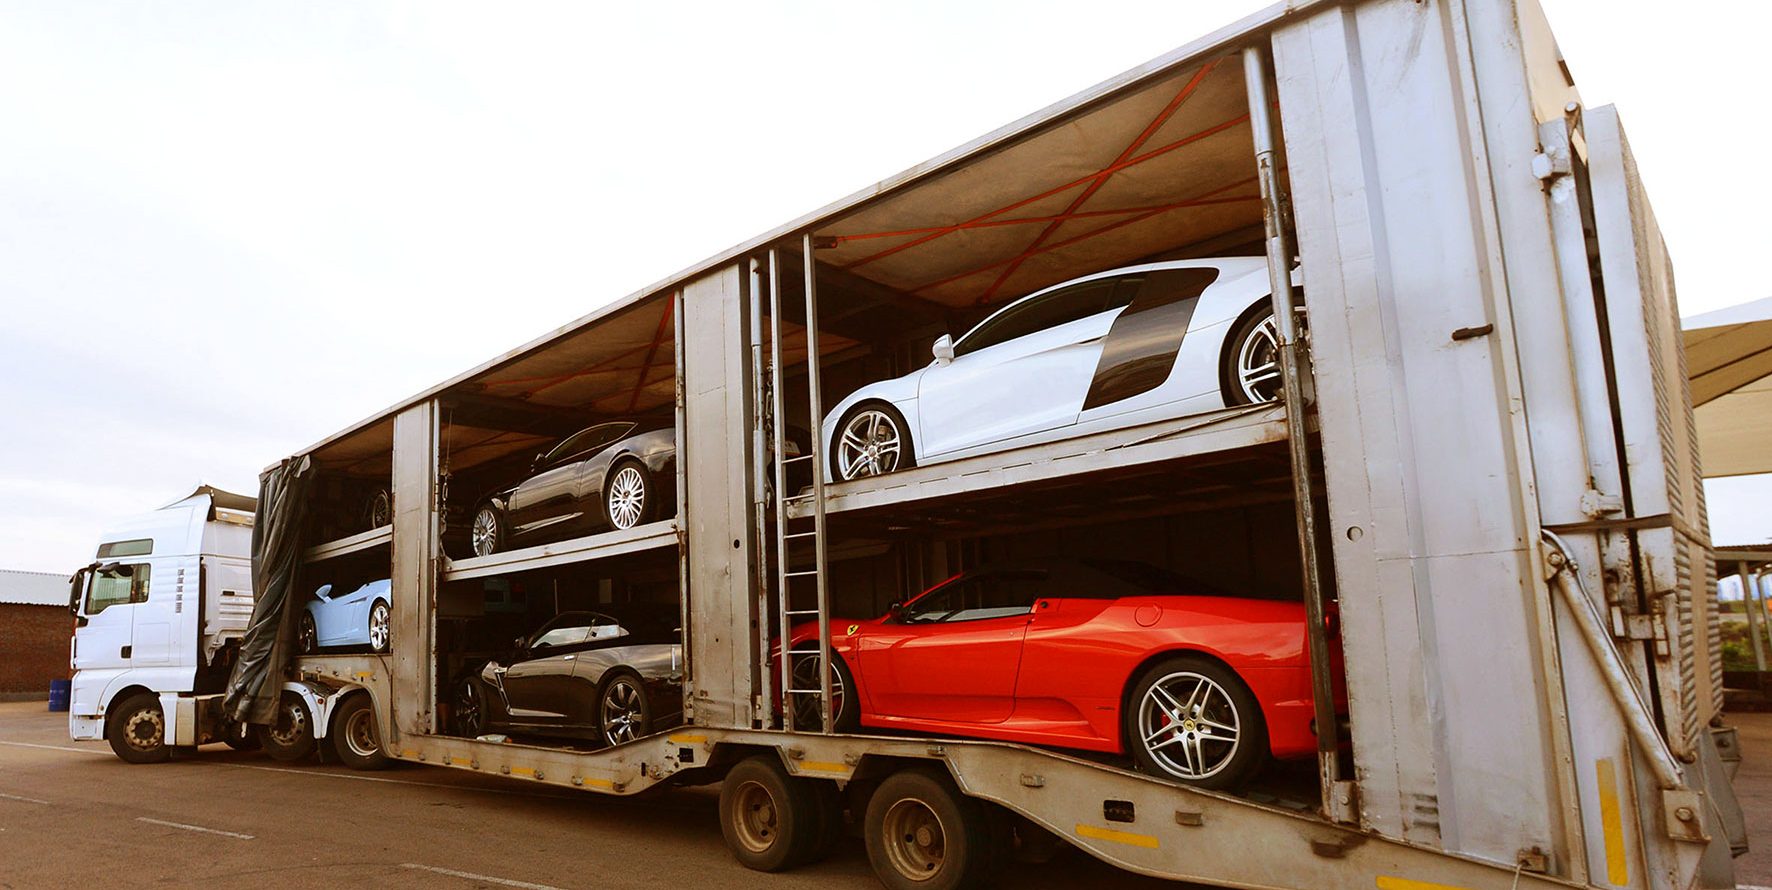 Precautions to take when using an Enclosed Auto Transporter